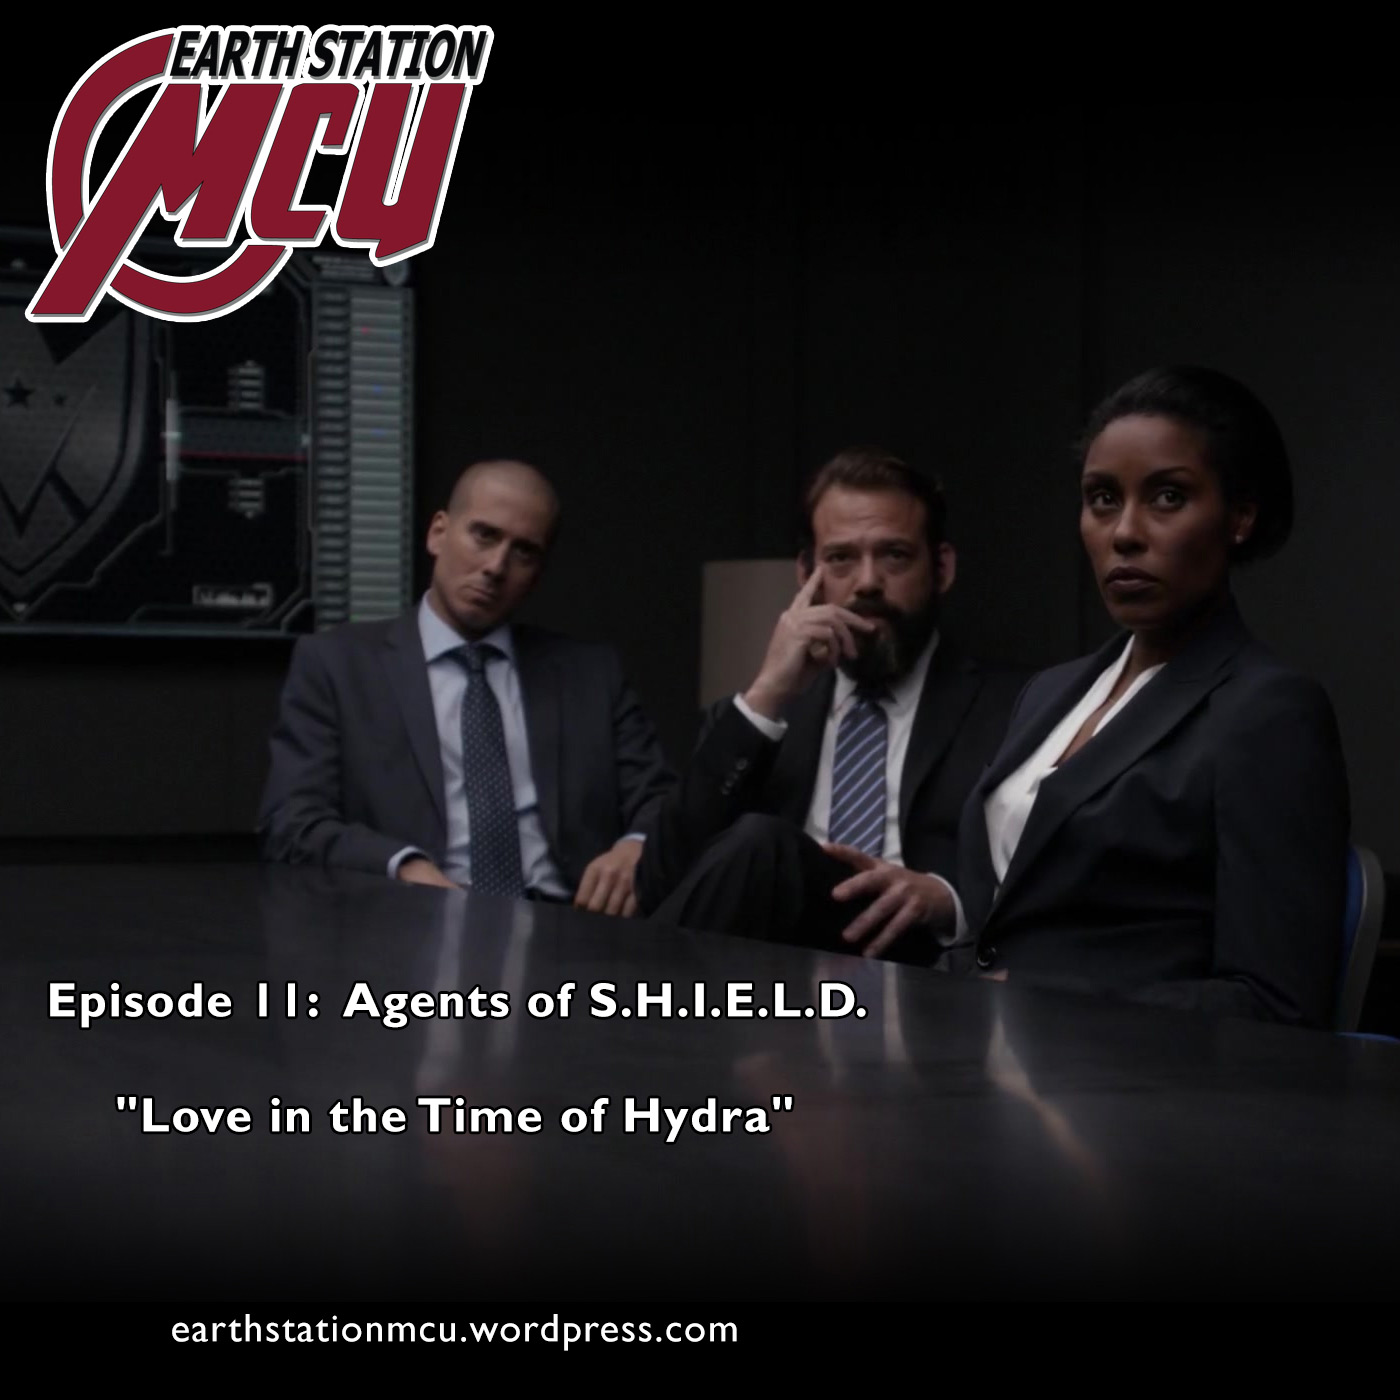 Earth Station MCU Episode Eleven: ”Love in the Time of Hydra”